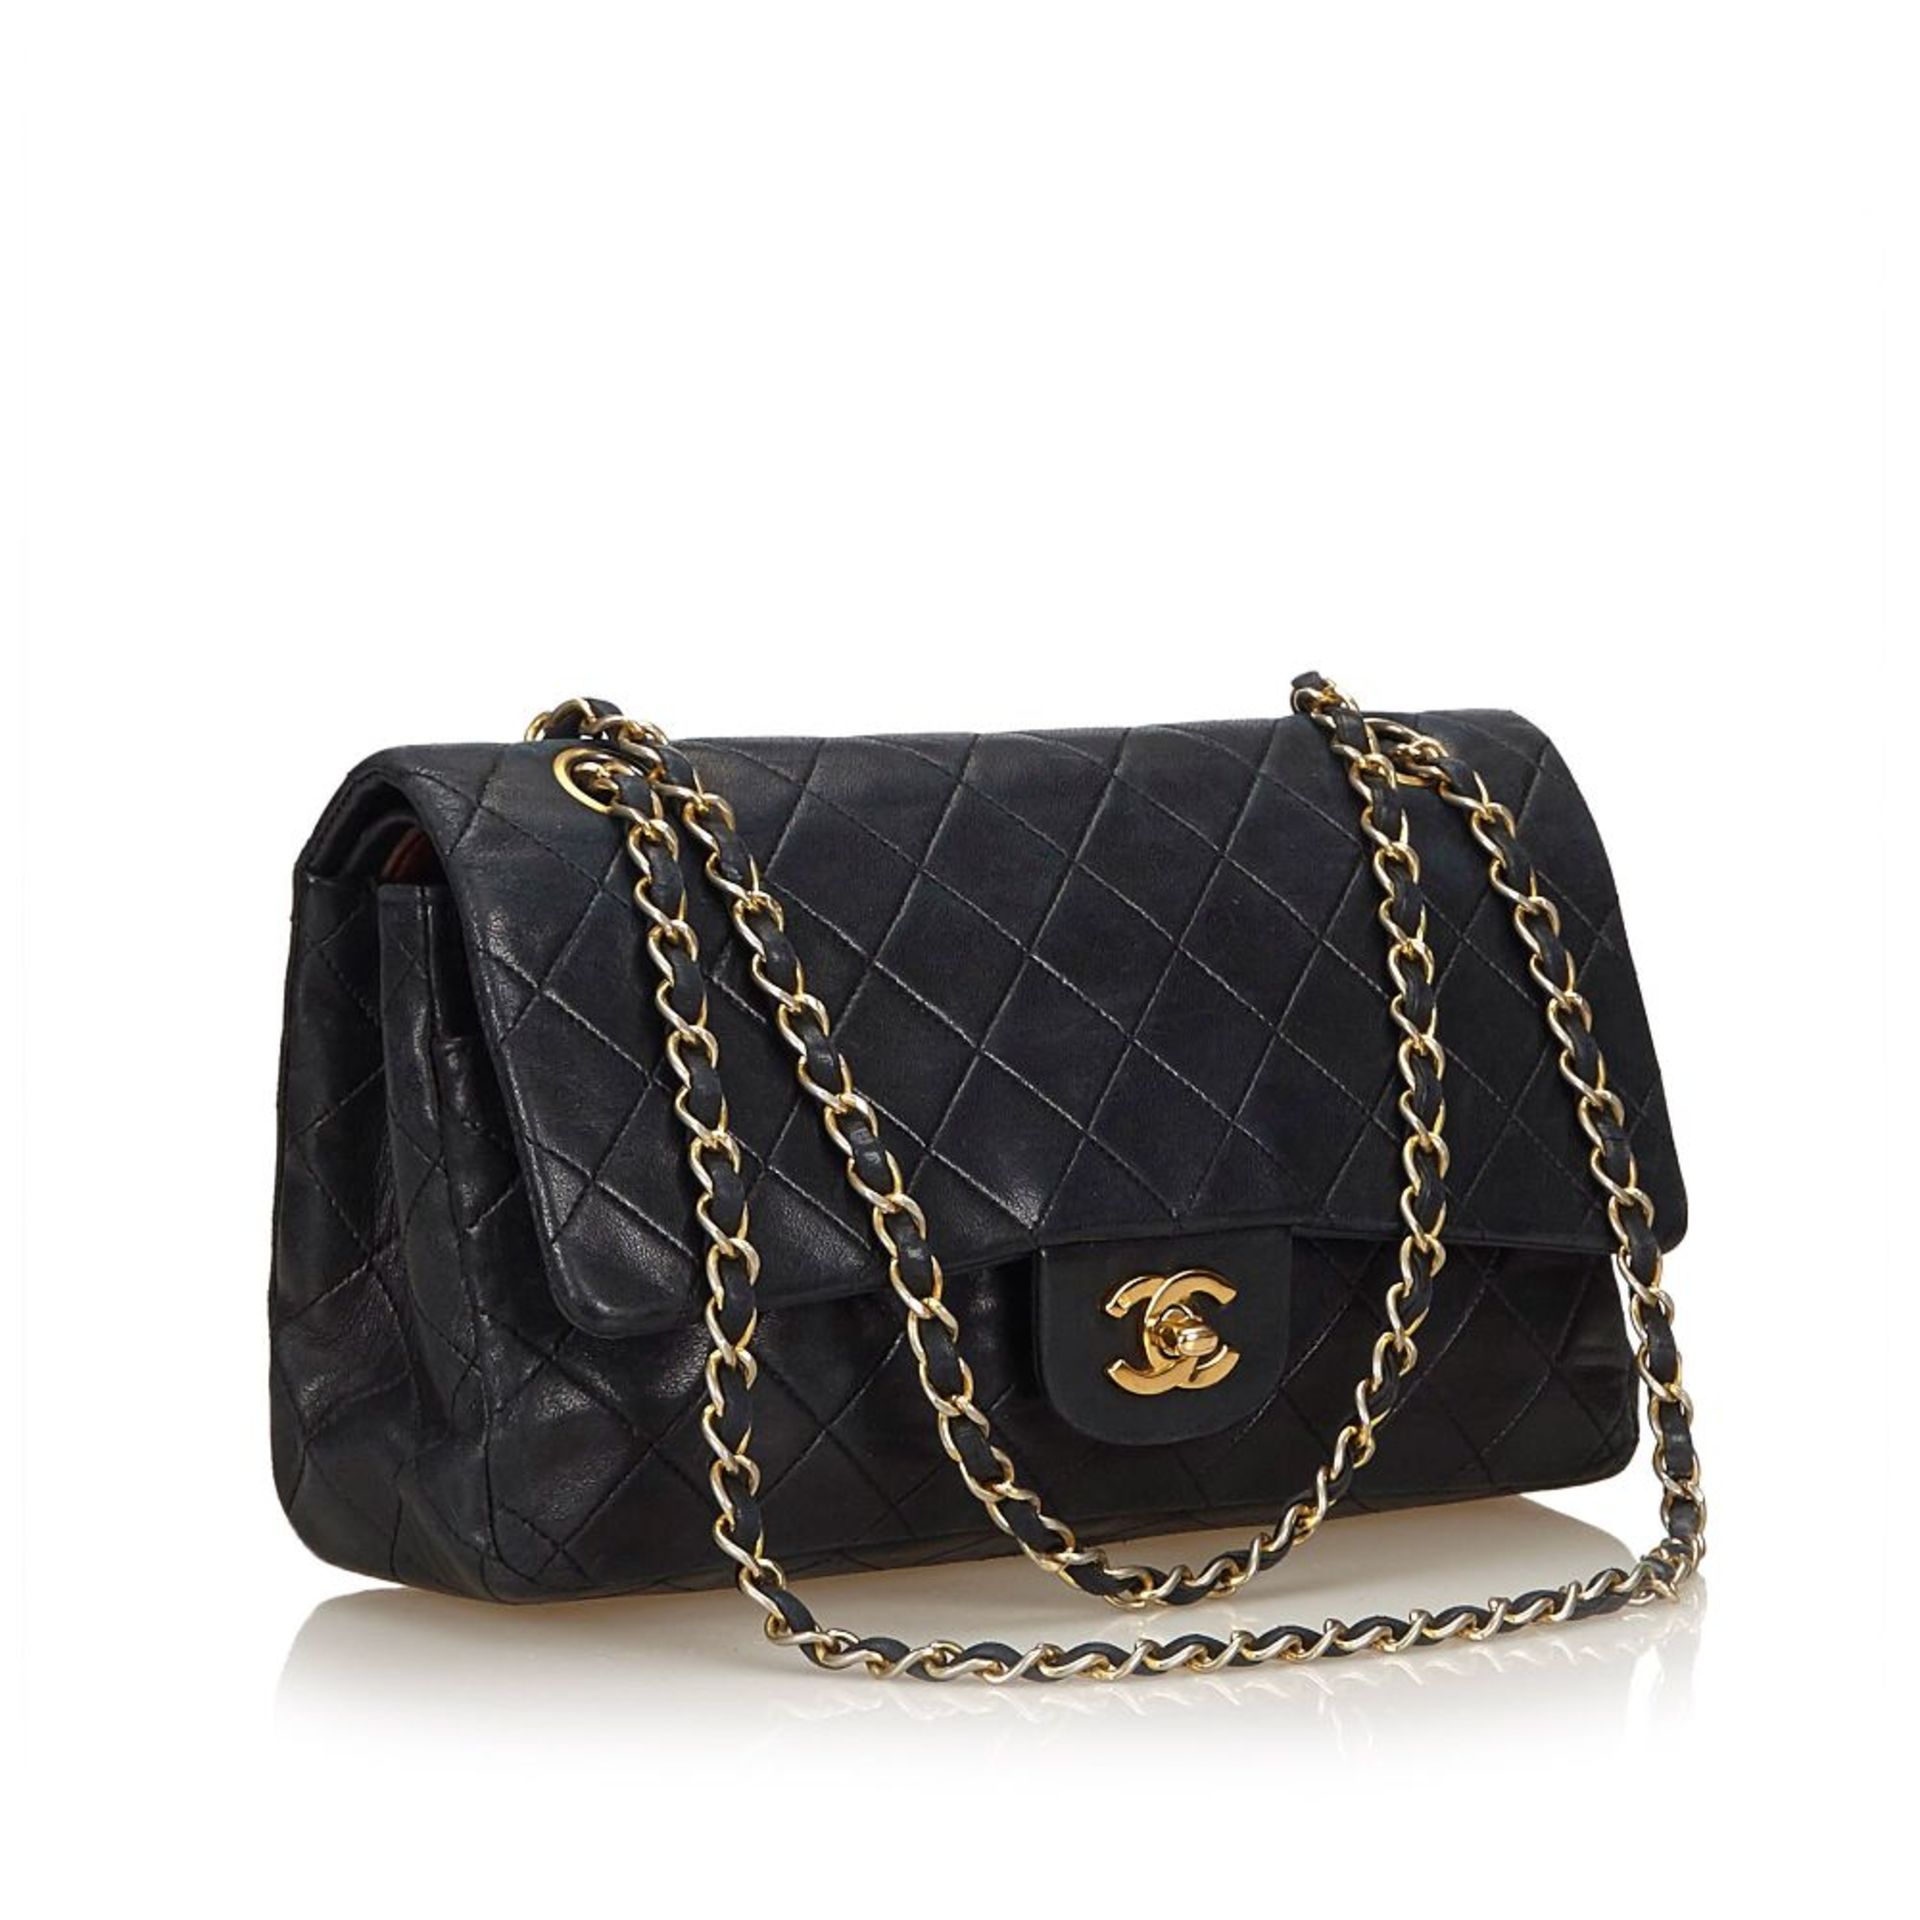 A Chanel classic medium double flap bag,featuring a quilted lambskin leather body, chain shoulder - Bild 2 aus 7